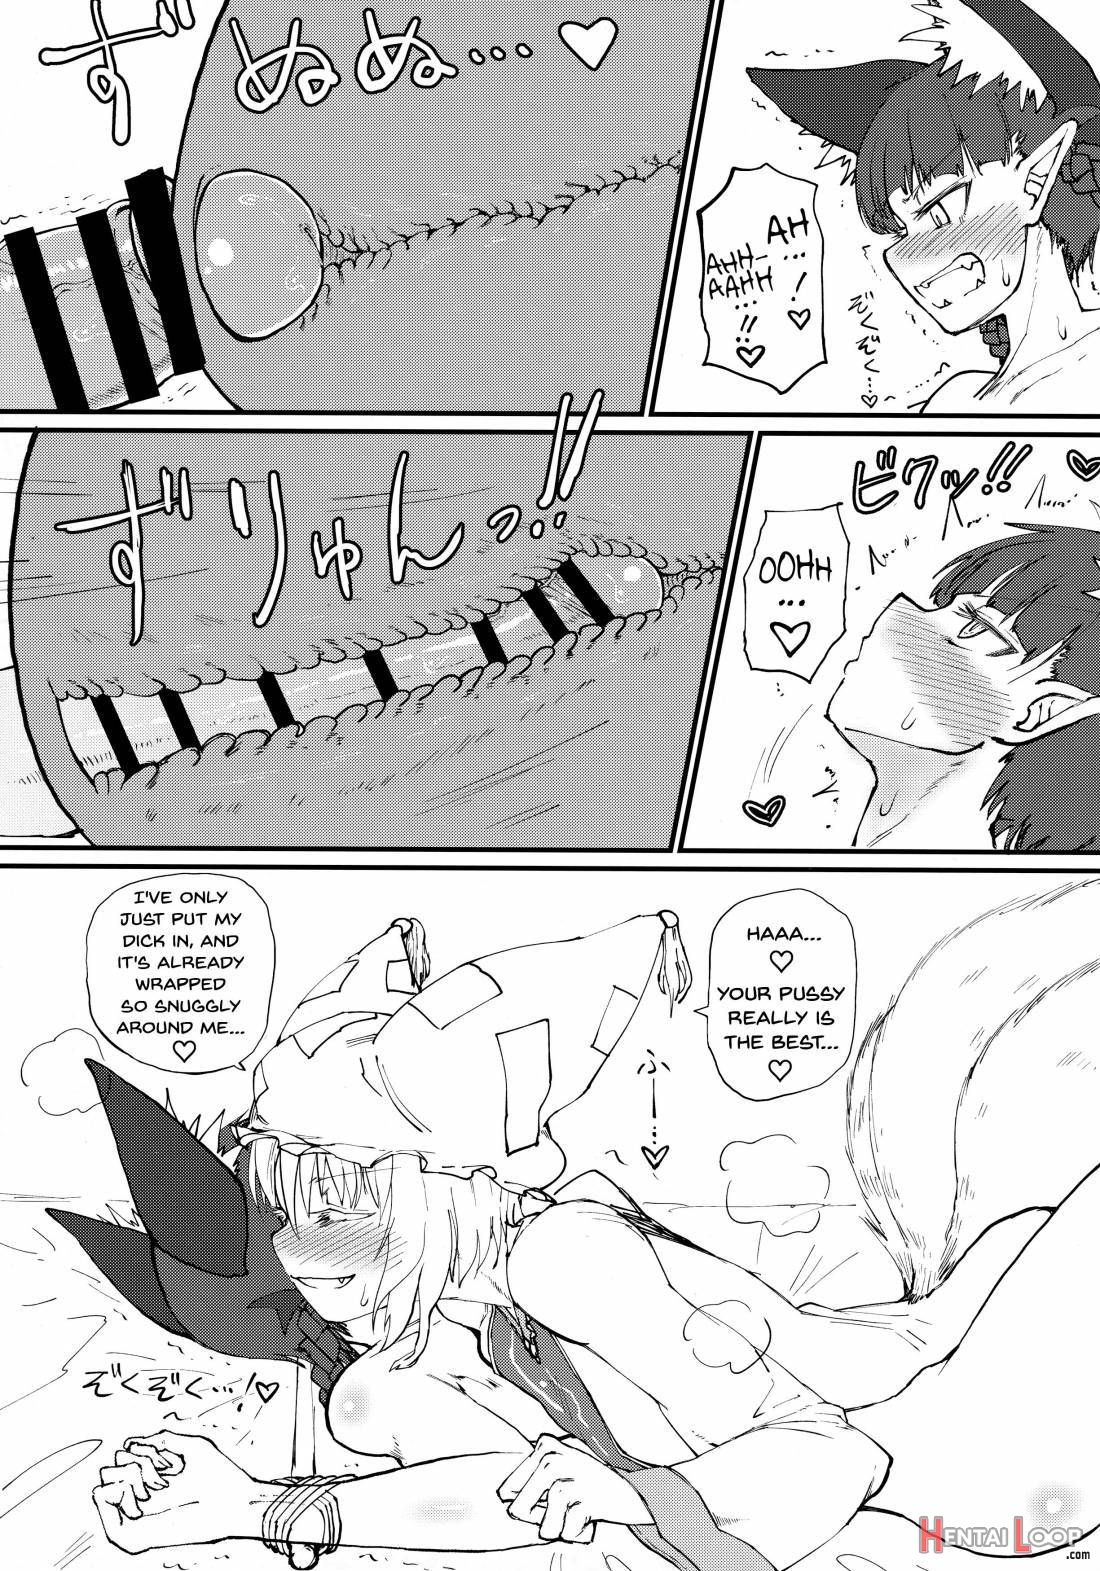 Hakeguchi Orin-chan!, Outlet For Desire: Orin! page 8